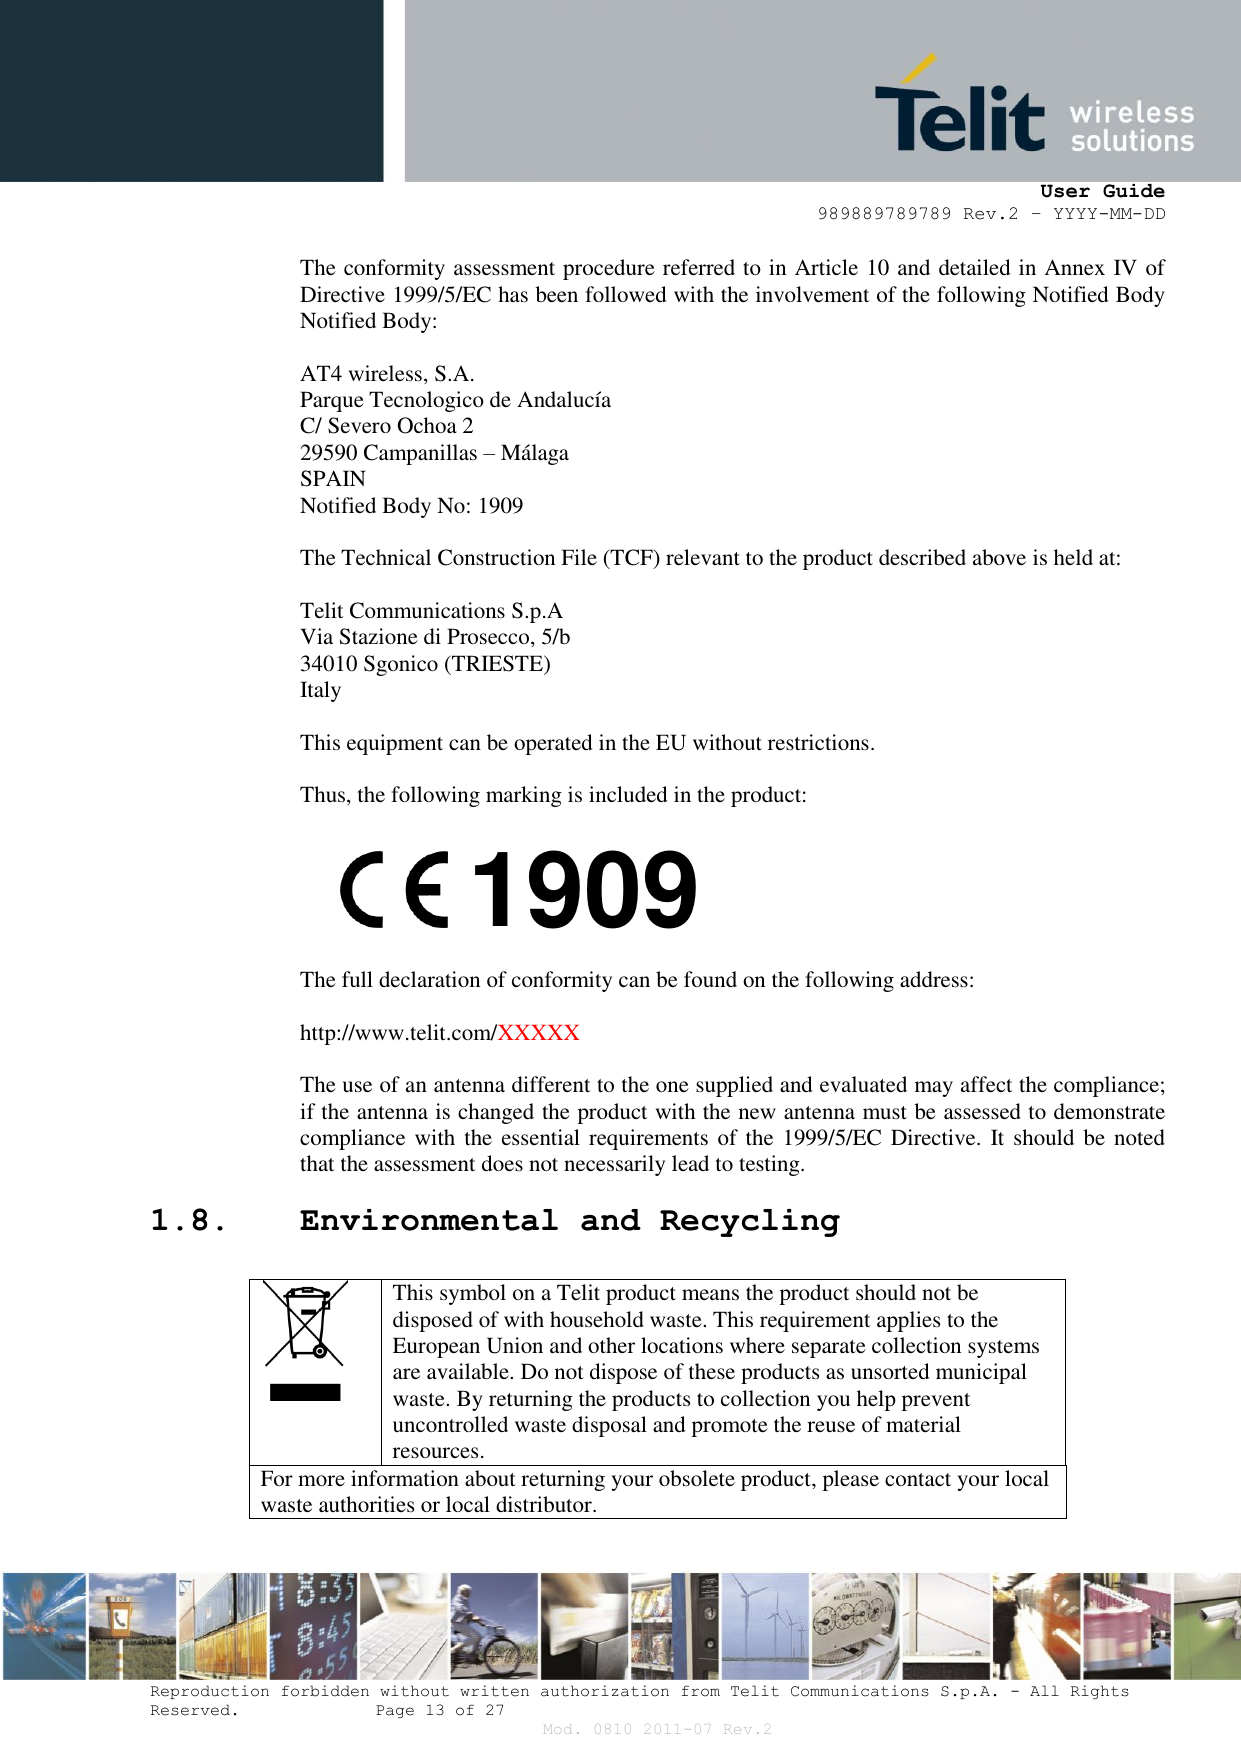      User Guide 989889789789 Rev.2 – YYYY-MM-DD  Reproduction forbidden without written authorization from Telit Communications S.p.A. - All Rights Reserved.    Page 13 of 27 Mod. 0810 2011-07 Rev.2 The conformity assessment procedure referred to in Article 10 and detailed in Annex IV of Directive 1999/5/EC has been followed with the involvement of the following Notified Body Notified Body:  AT4 wireless, S.A. Parque Tecnologico de Andalucía C/ Severo Ochoa 2 29590 Campanillas – Málaga SPAIN Notified Body No: 1909  The Technical Construction File (TCF) relevant to the product described above is held at:  Telit Communications S.p.A Via Stazione di Prosecco, 5/b 34010 Sgonico (TRIESTE) Italy  This equipment can be operated in the EU without restrictions.  Thus, the following marking is included in the product:        The full declaration of conformity can be found on the following address:  http://www.telit.com/XXXXX  The use of an antenna different to the one supplied and evaluated may affect the compliance; if the antenna is changed the product with the new antenna must be assessed to demonstrate compliance with the essential requirements of the 1999/5/EC Directive. It should be noted that the assessment does not necessarily lead to testing. 1.8. Environmental and Recycling   This symbol on a Telit product means the product should not be disposed of with household waste. This requirement applies to the European Union and other locations where separate collection systems are available. Do not dispose of these products as unsorted municipal waste. By returning the products to collection you help prevent uncontrolled waste disposal and promote the reuse of material resources. For more information about returning your obsolete product, please contact your local waste authorities or local distributor. 1909 